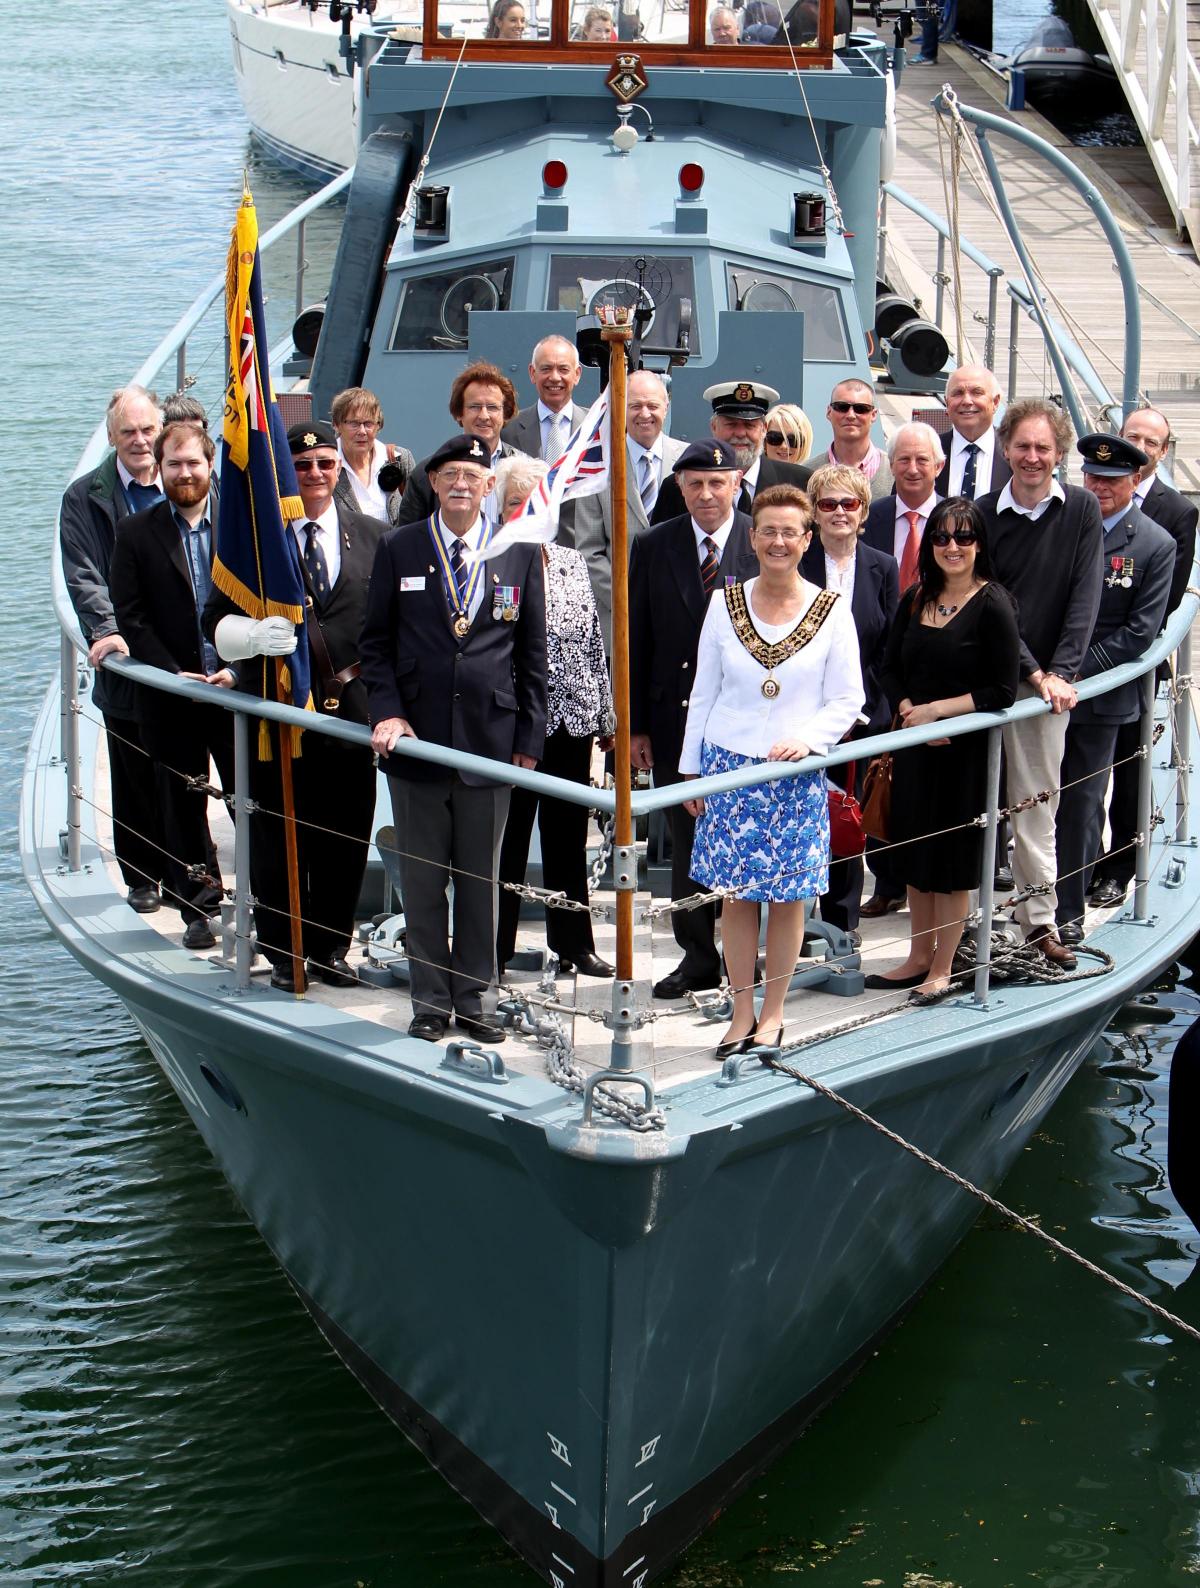 Civic party aboard HMS Medusa with mayor of Southampton Cllr Sue Blatchford, Ocean Village, Southampton. D-Day Commemorations in Hampshire.